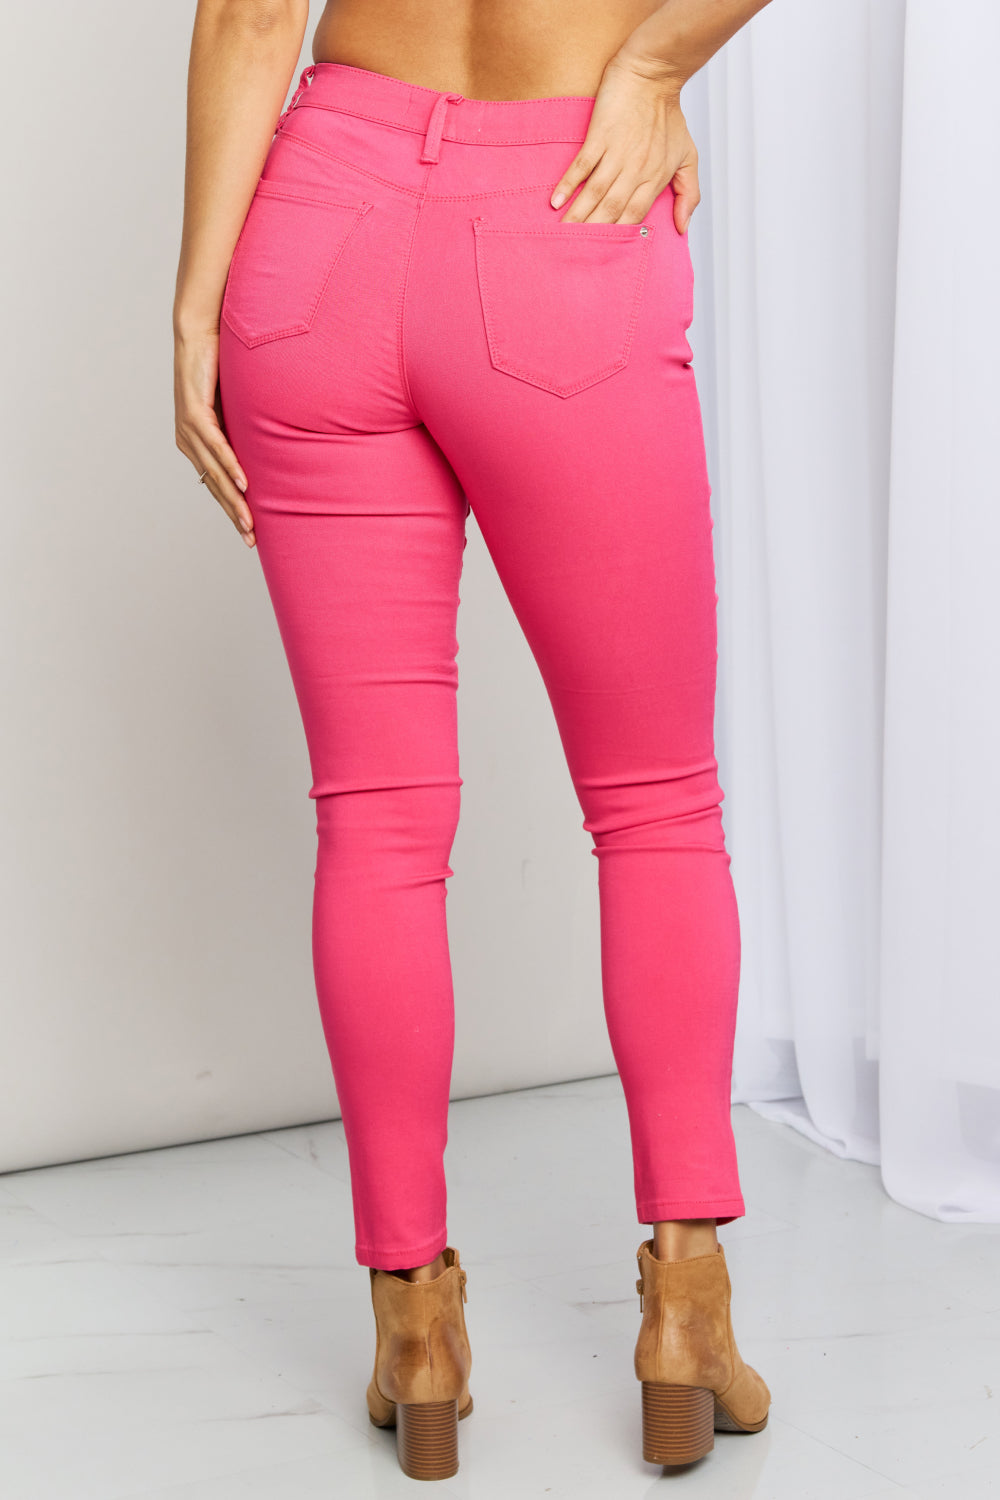 Kate Hyper-Stretch Full Size Mid-Rise Skinny Jeans in Fiery Coral | Jeans - CHANELIA